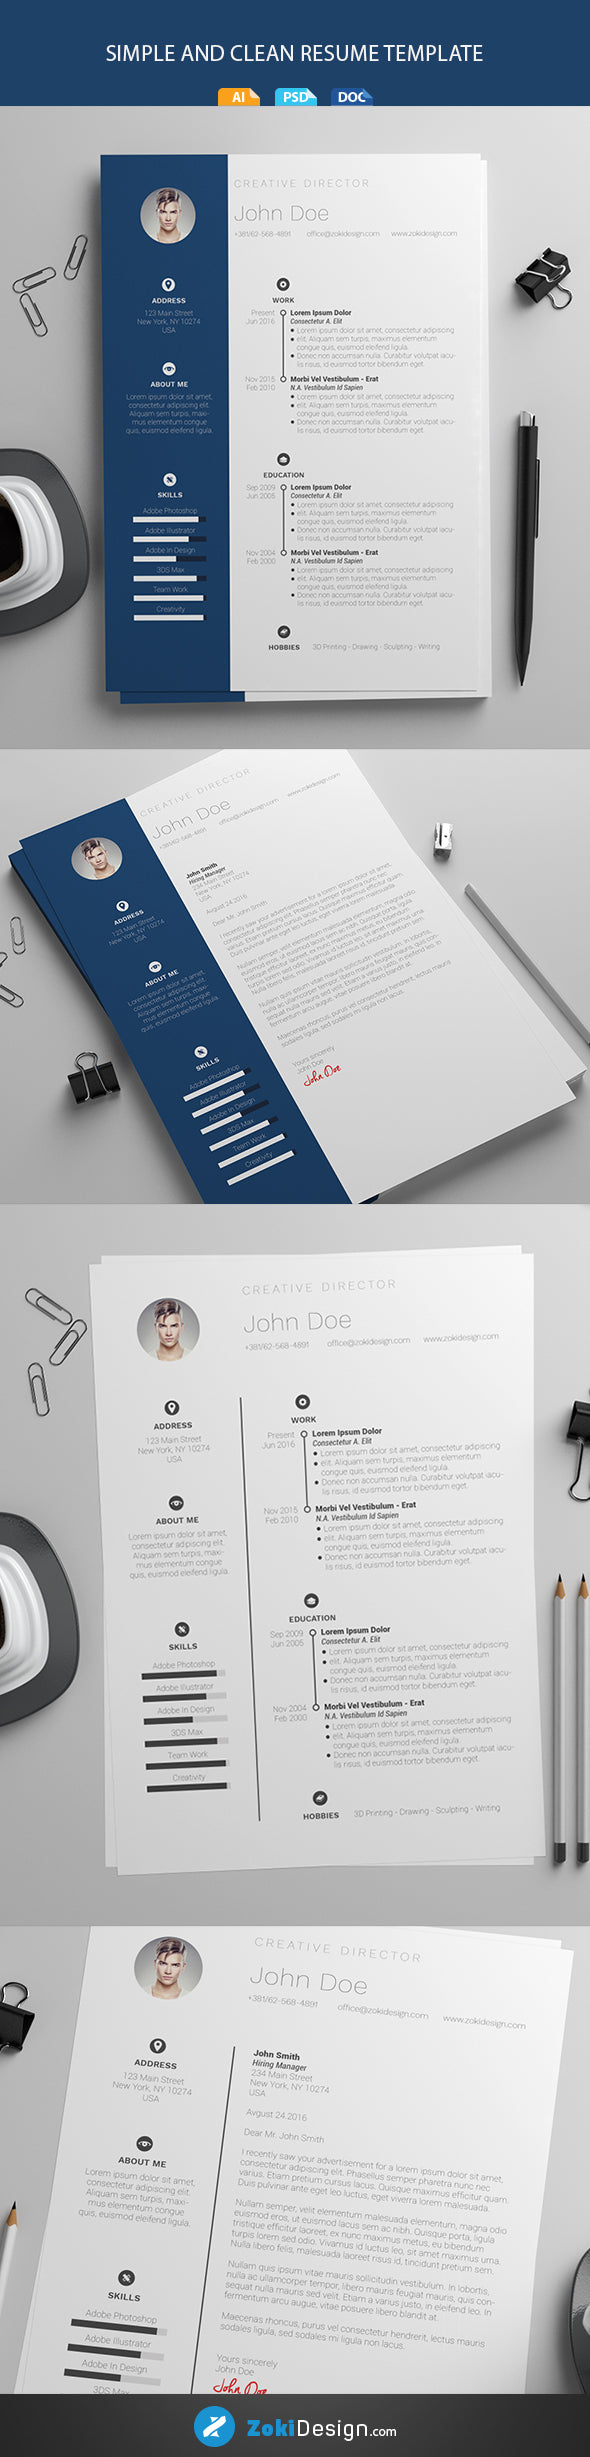 Free Clean Modern Resume and CV Template in Microsoft Word (DOC, DOCX), Photoshop (PSD) and Illustrator (AI) Formats